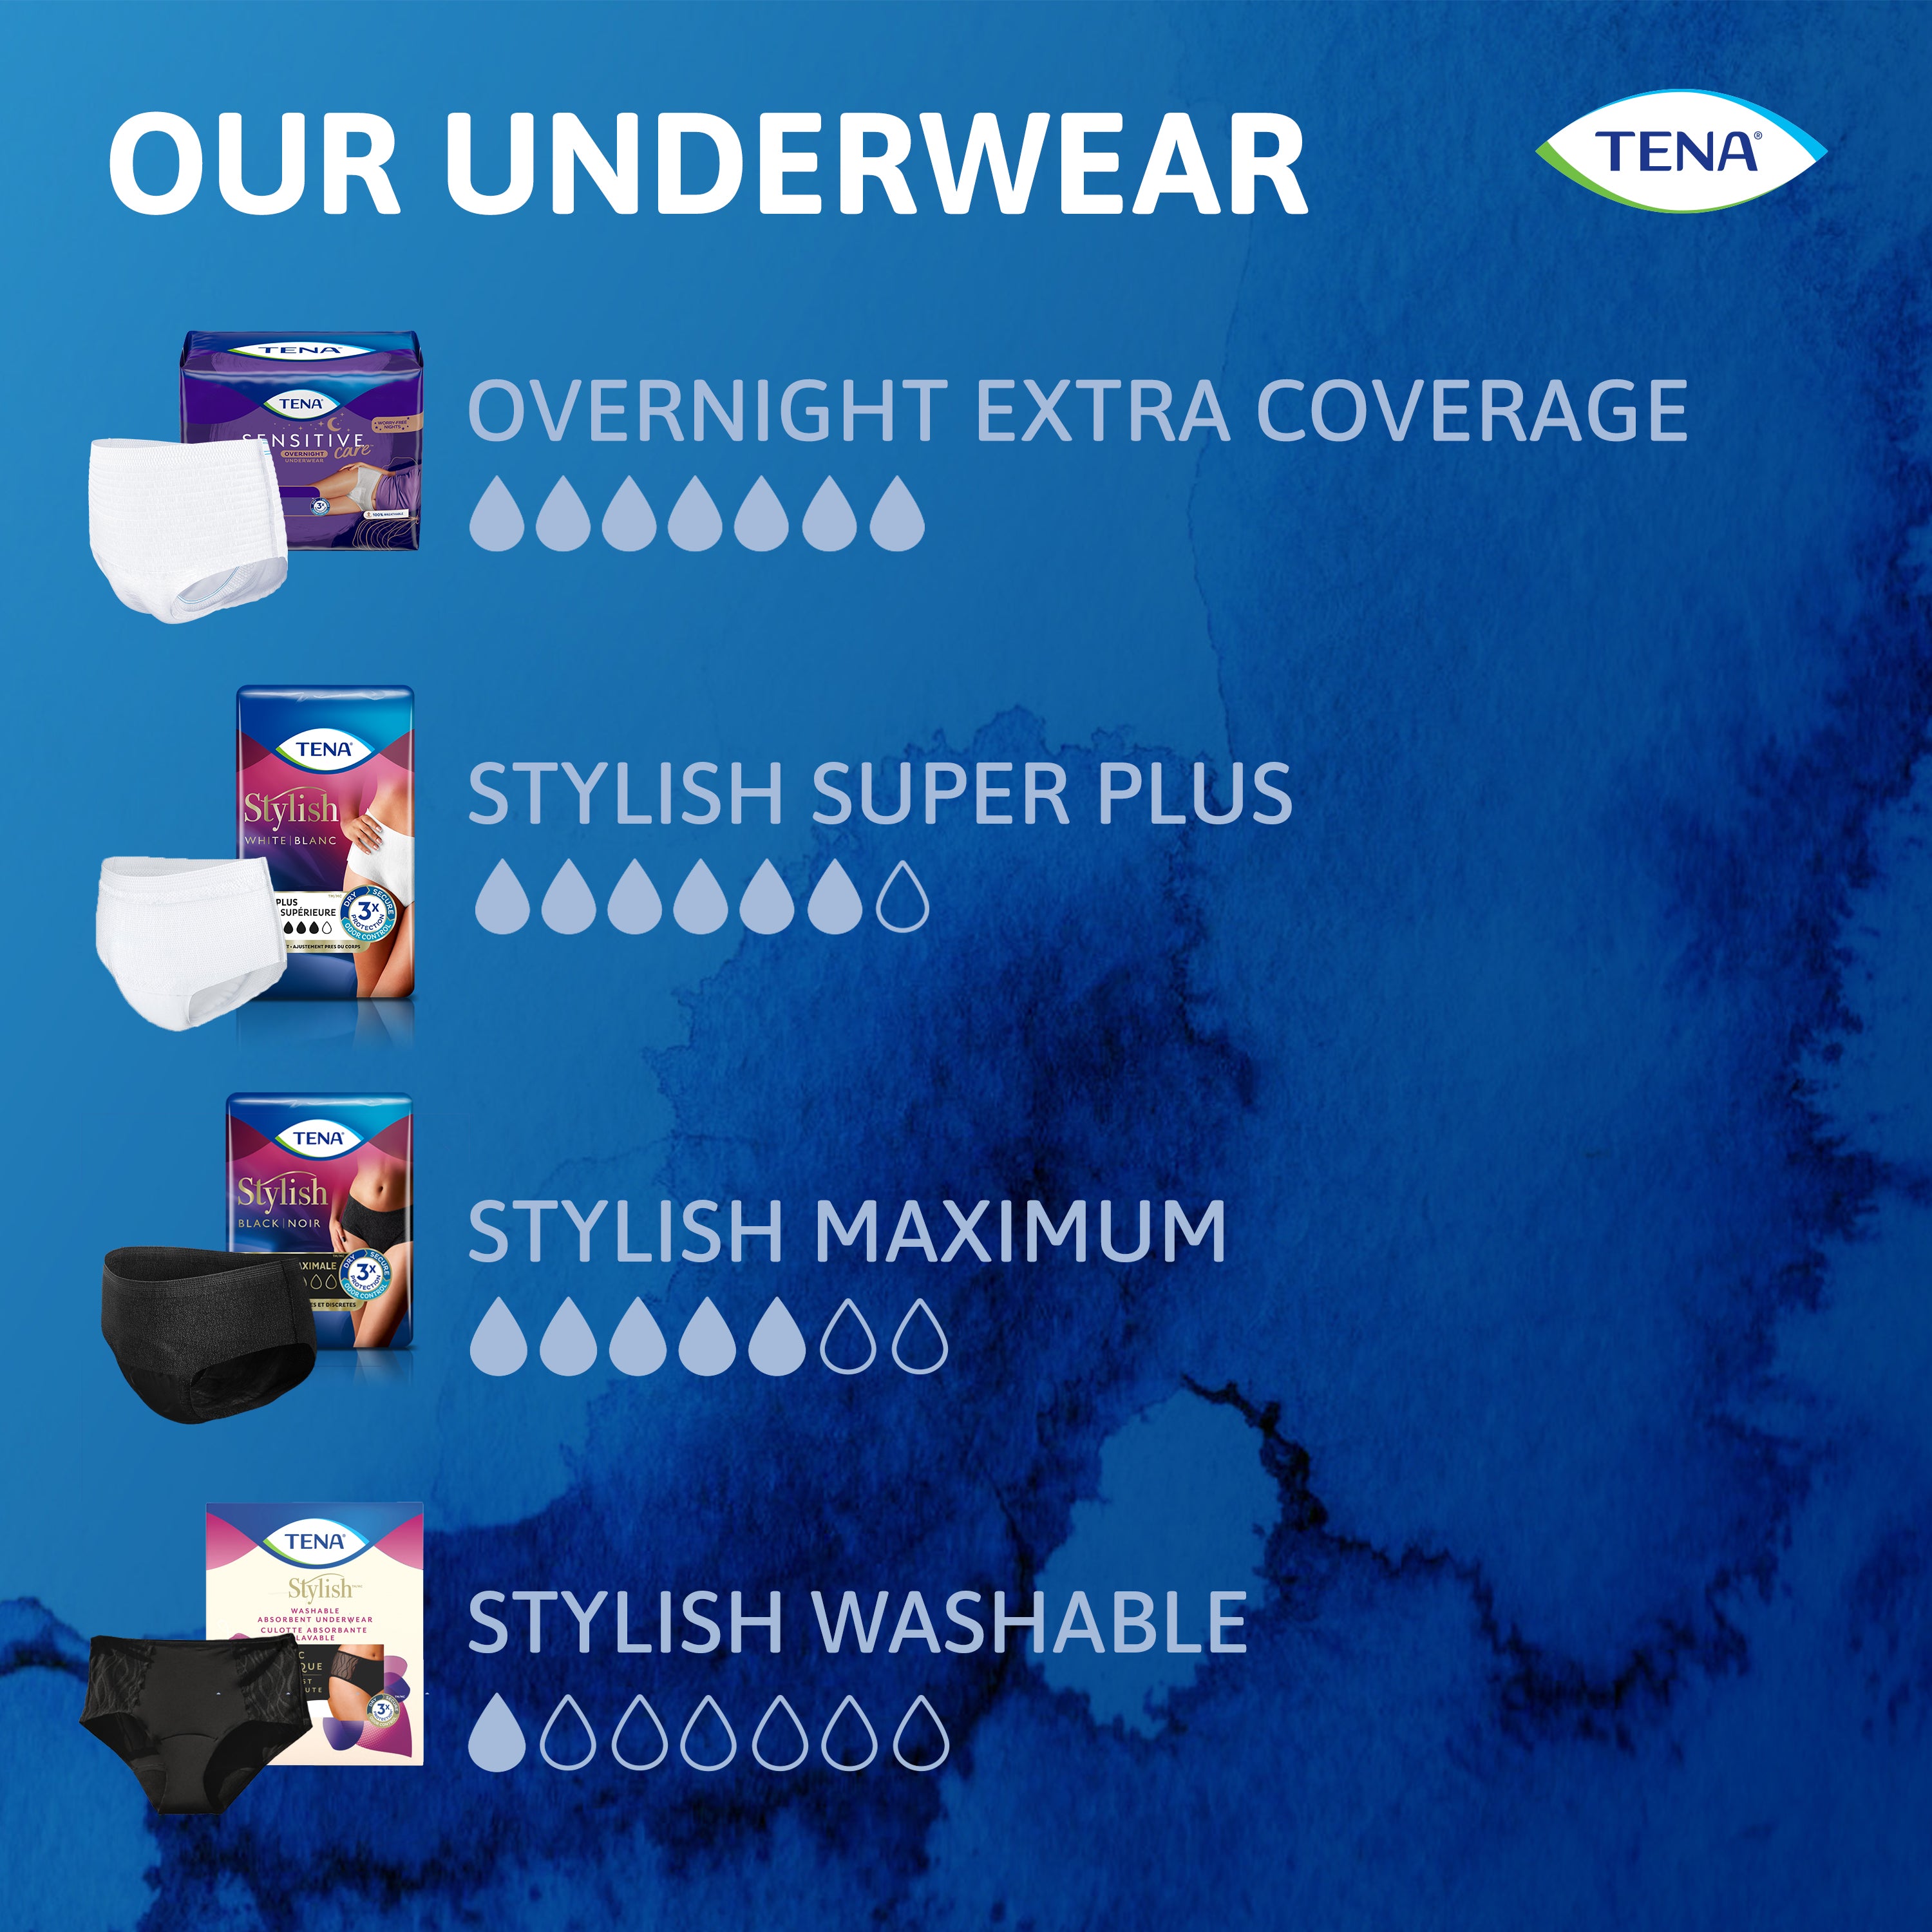 An absorbency chart that shows overnight underwear at the highest level of absorbency of TENA incontinence underwear